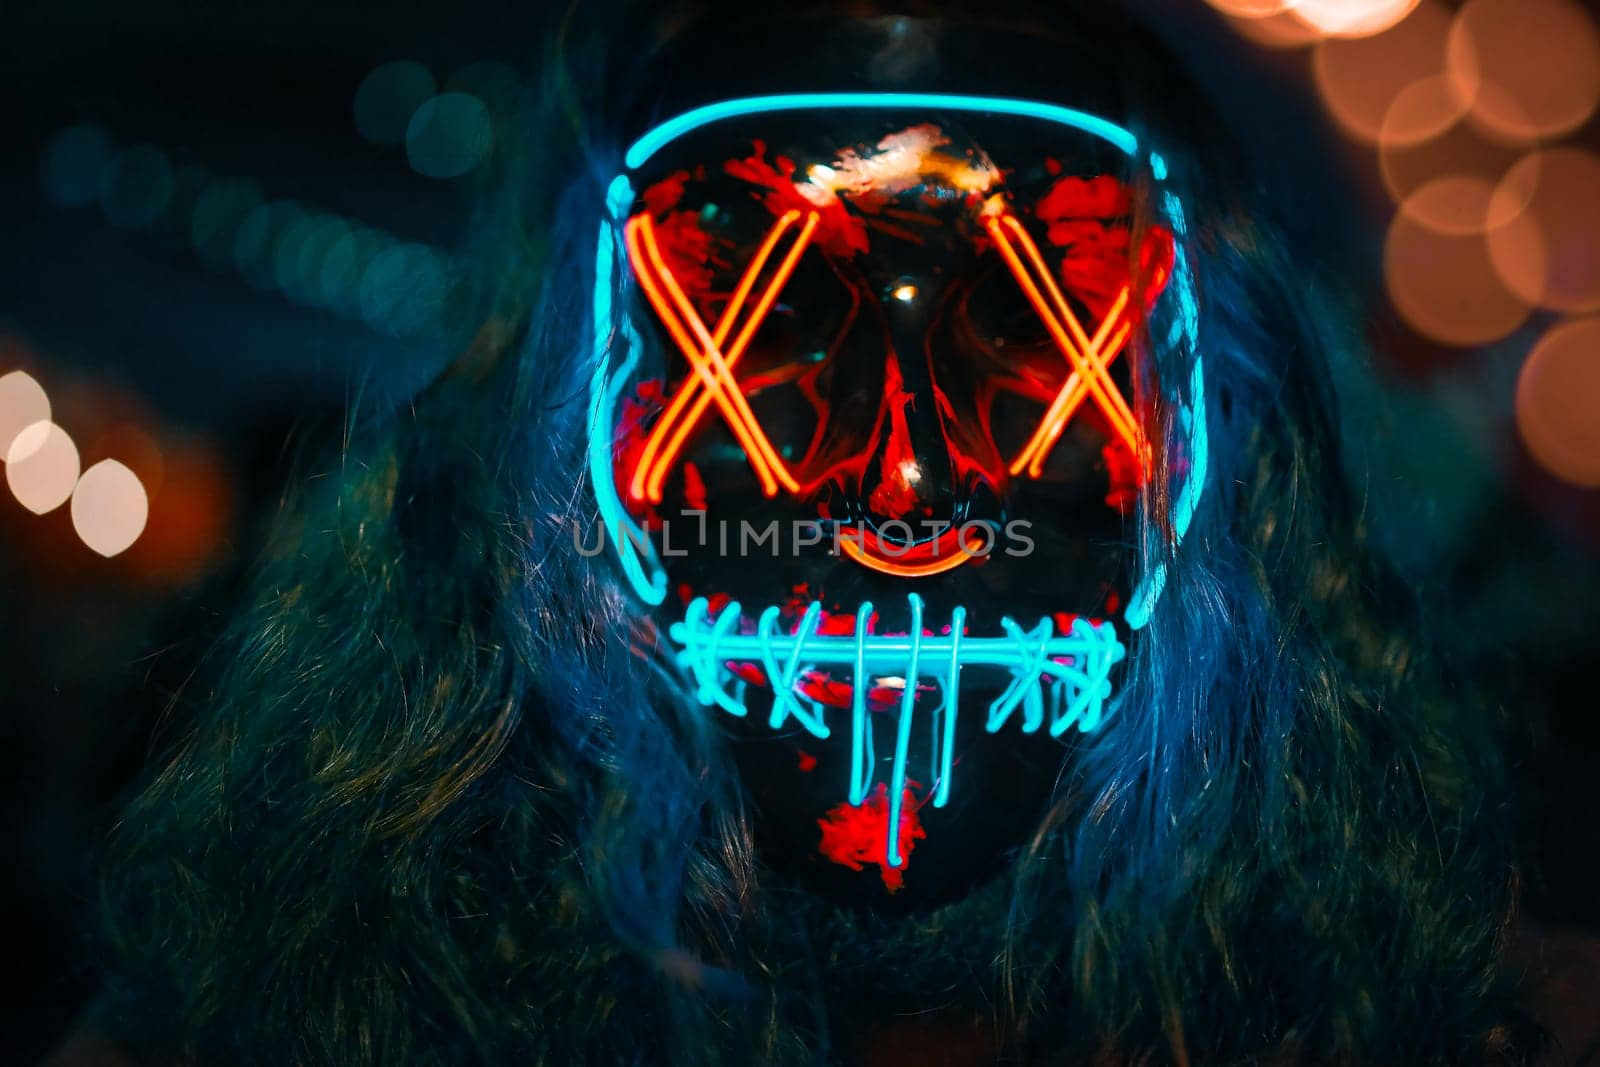 Man with long disheveled hair in a lighting neon glowing mask. by savconstantine